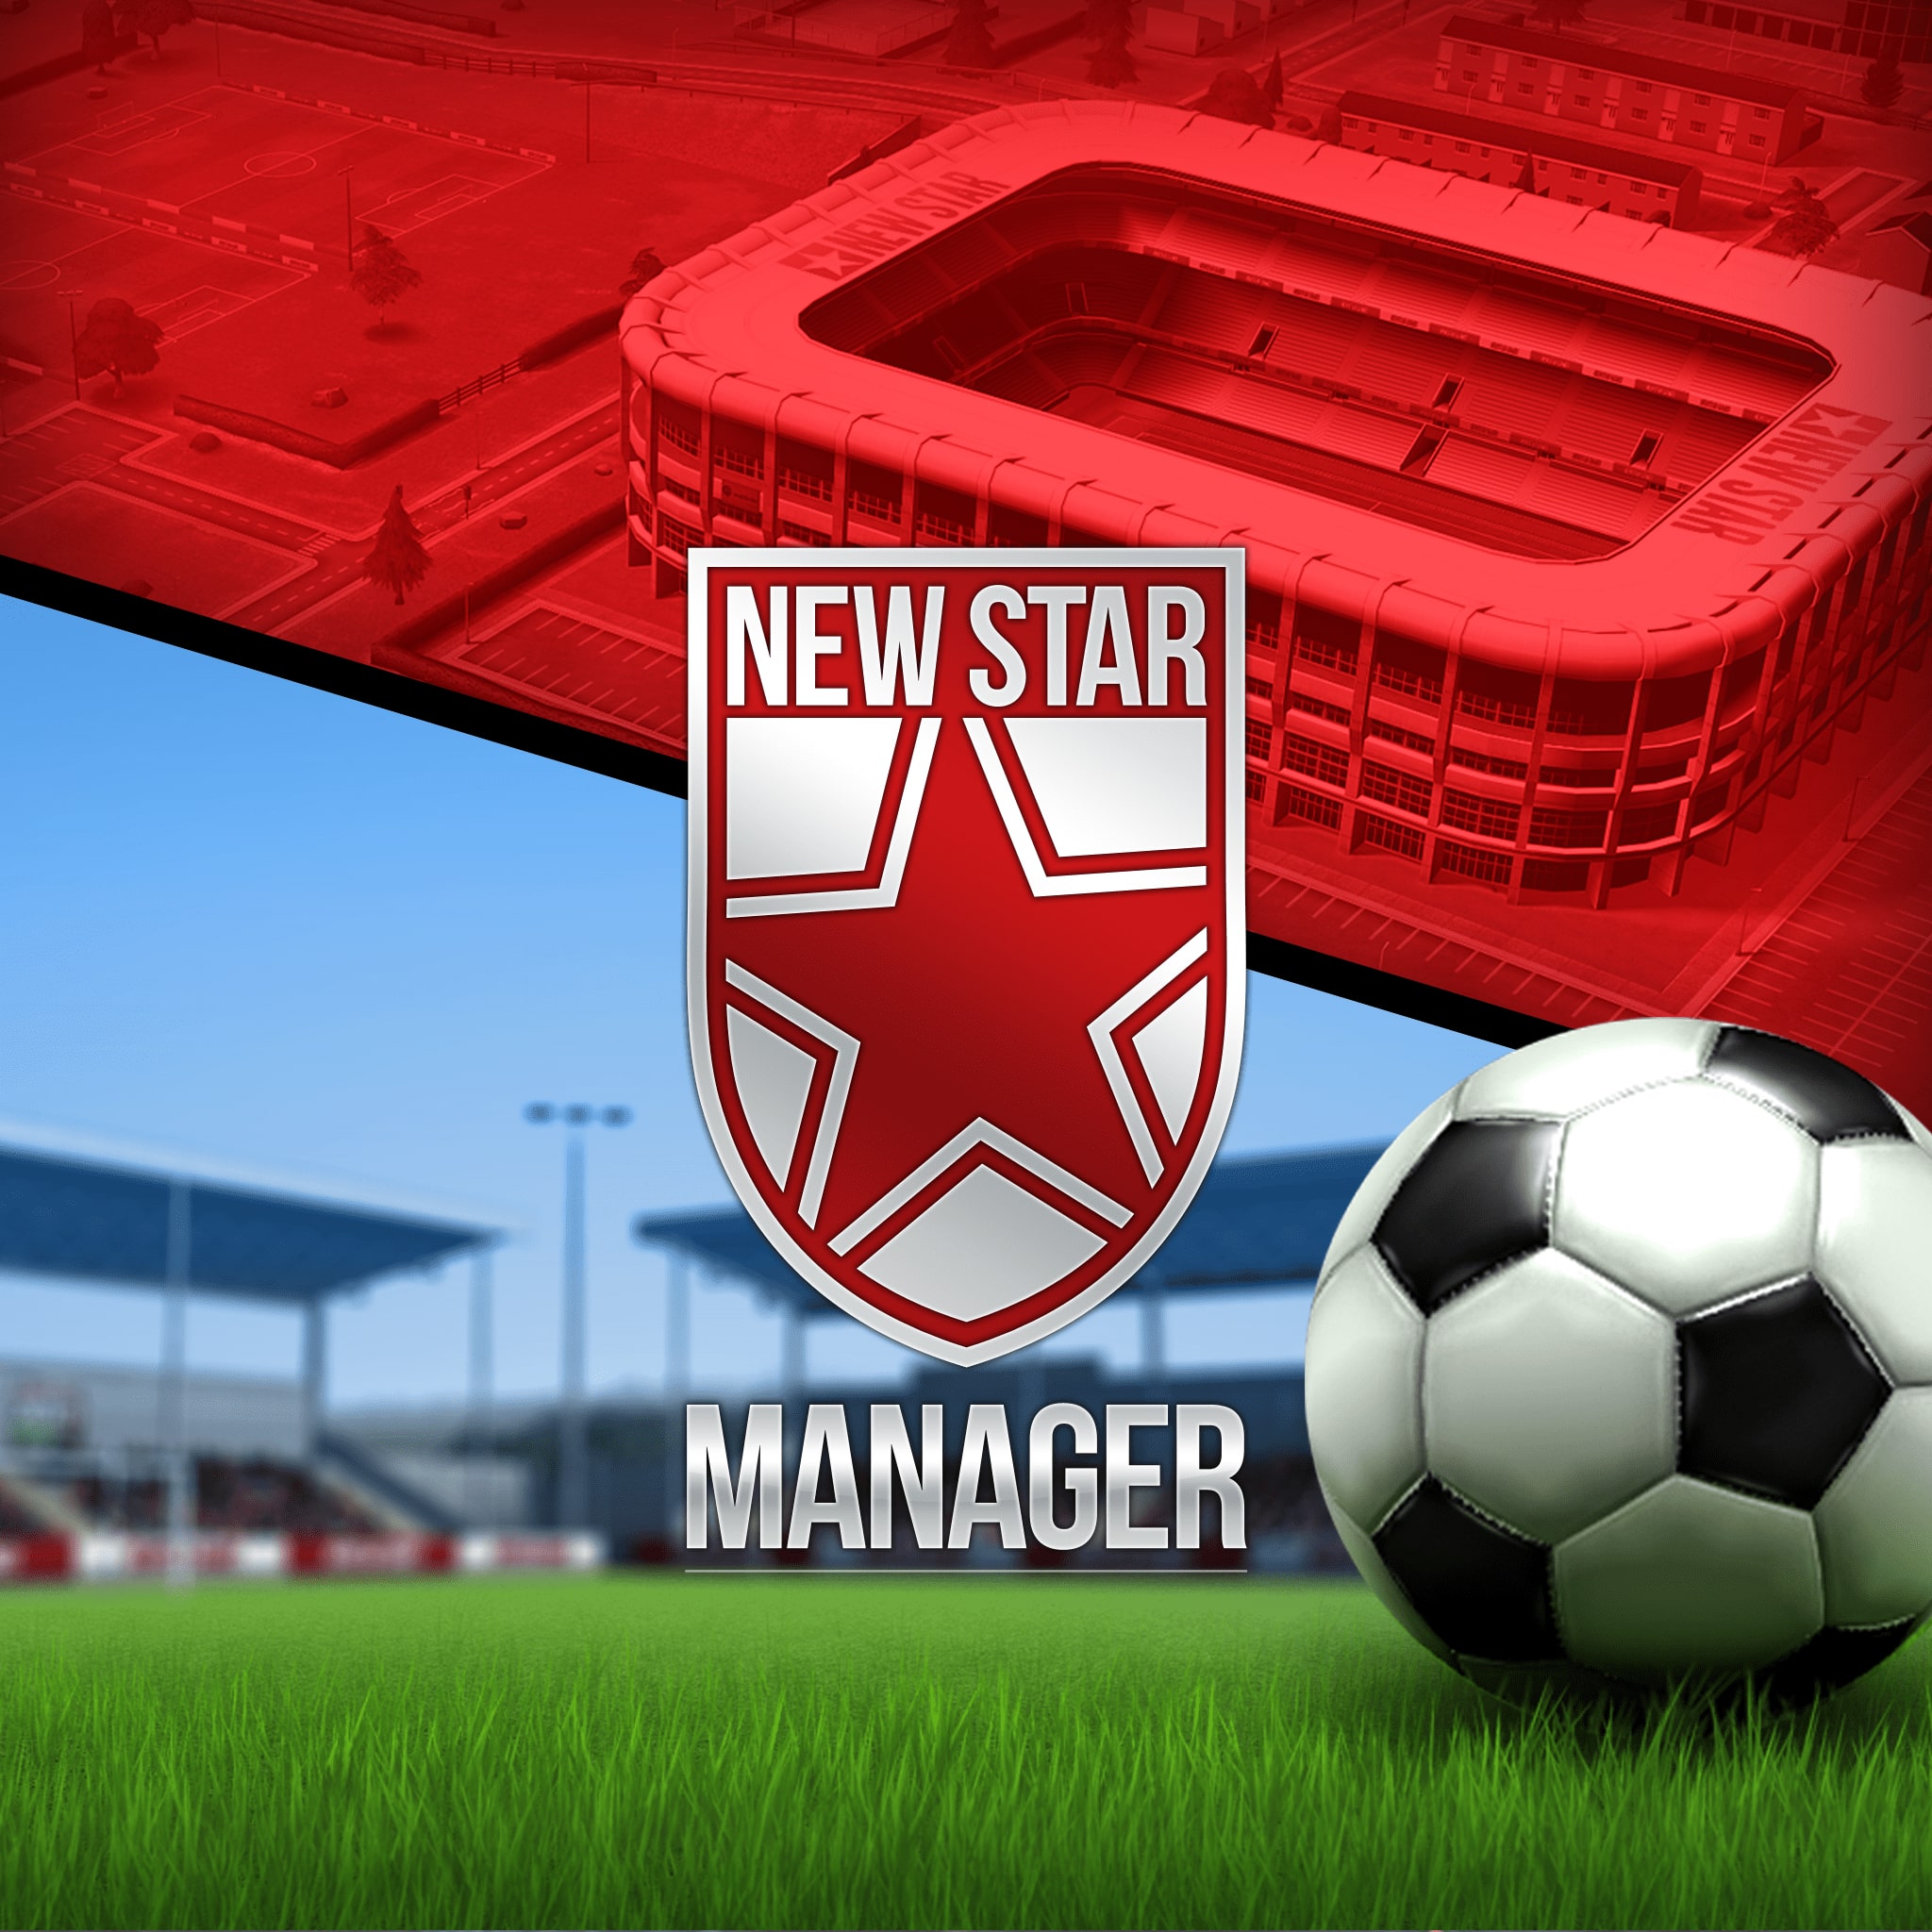 Star Manager